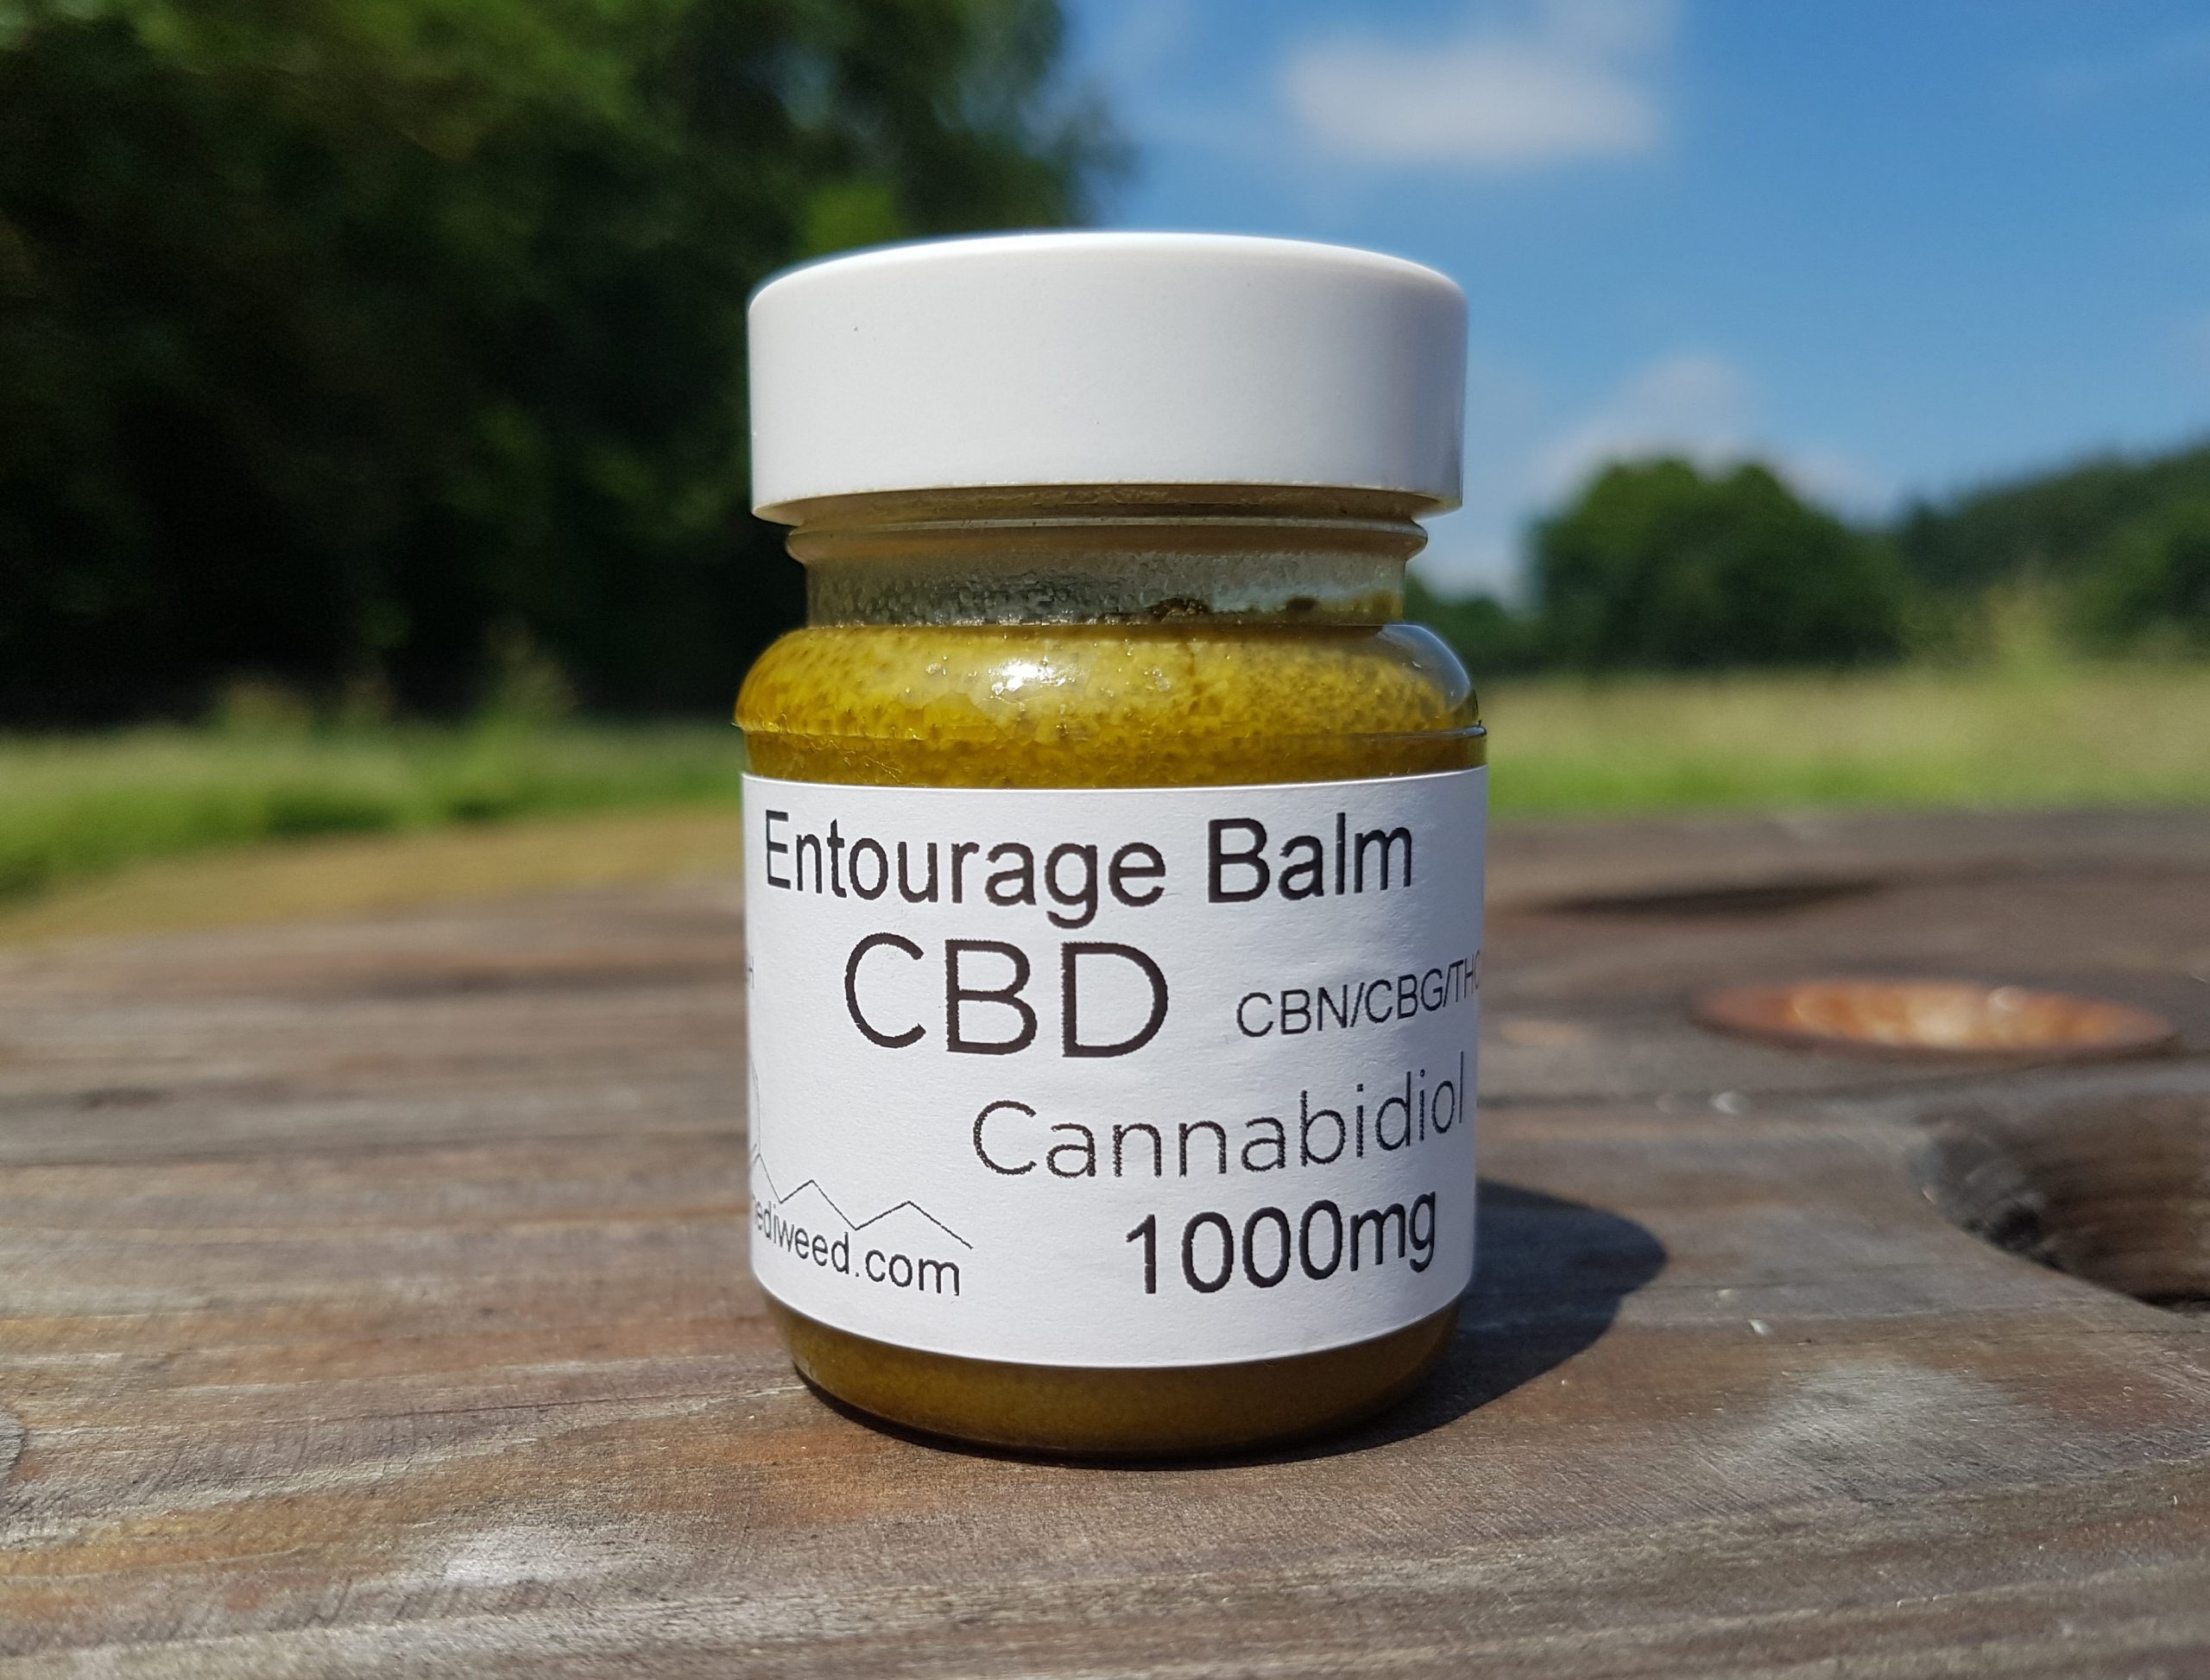 Mediweed – Luxury CBD products at bargain prices